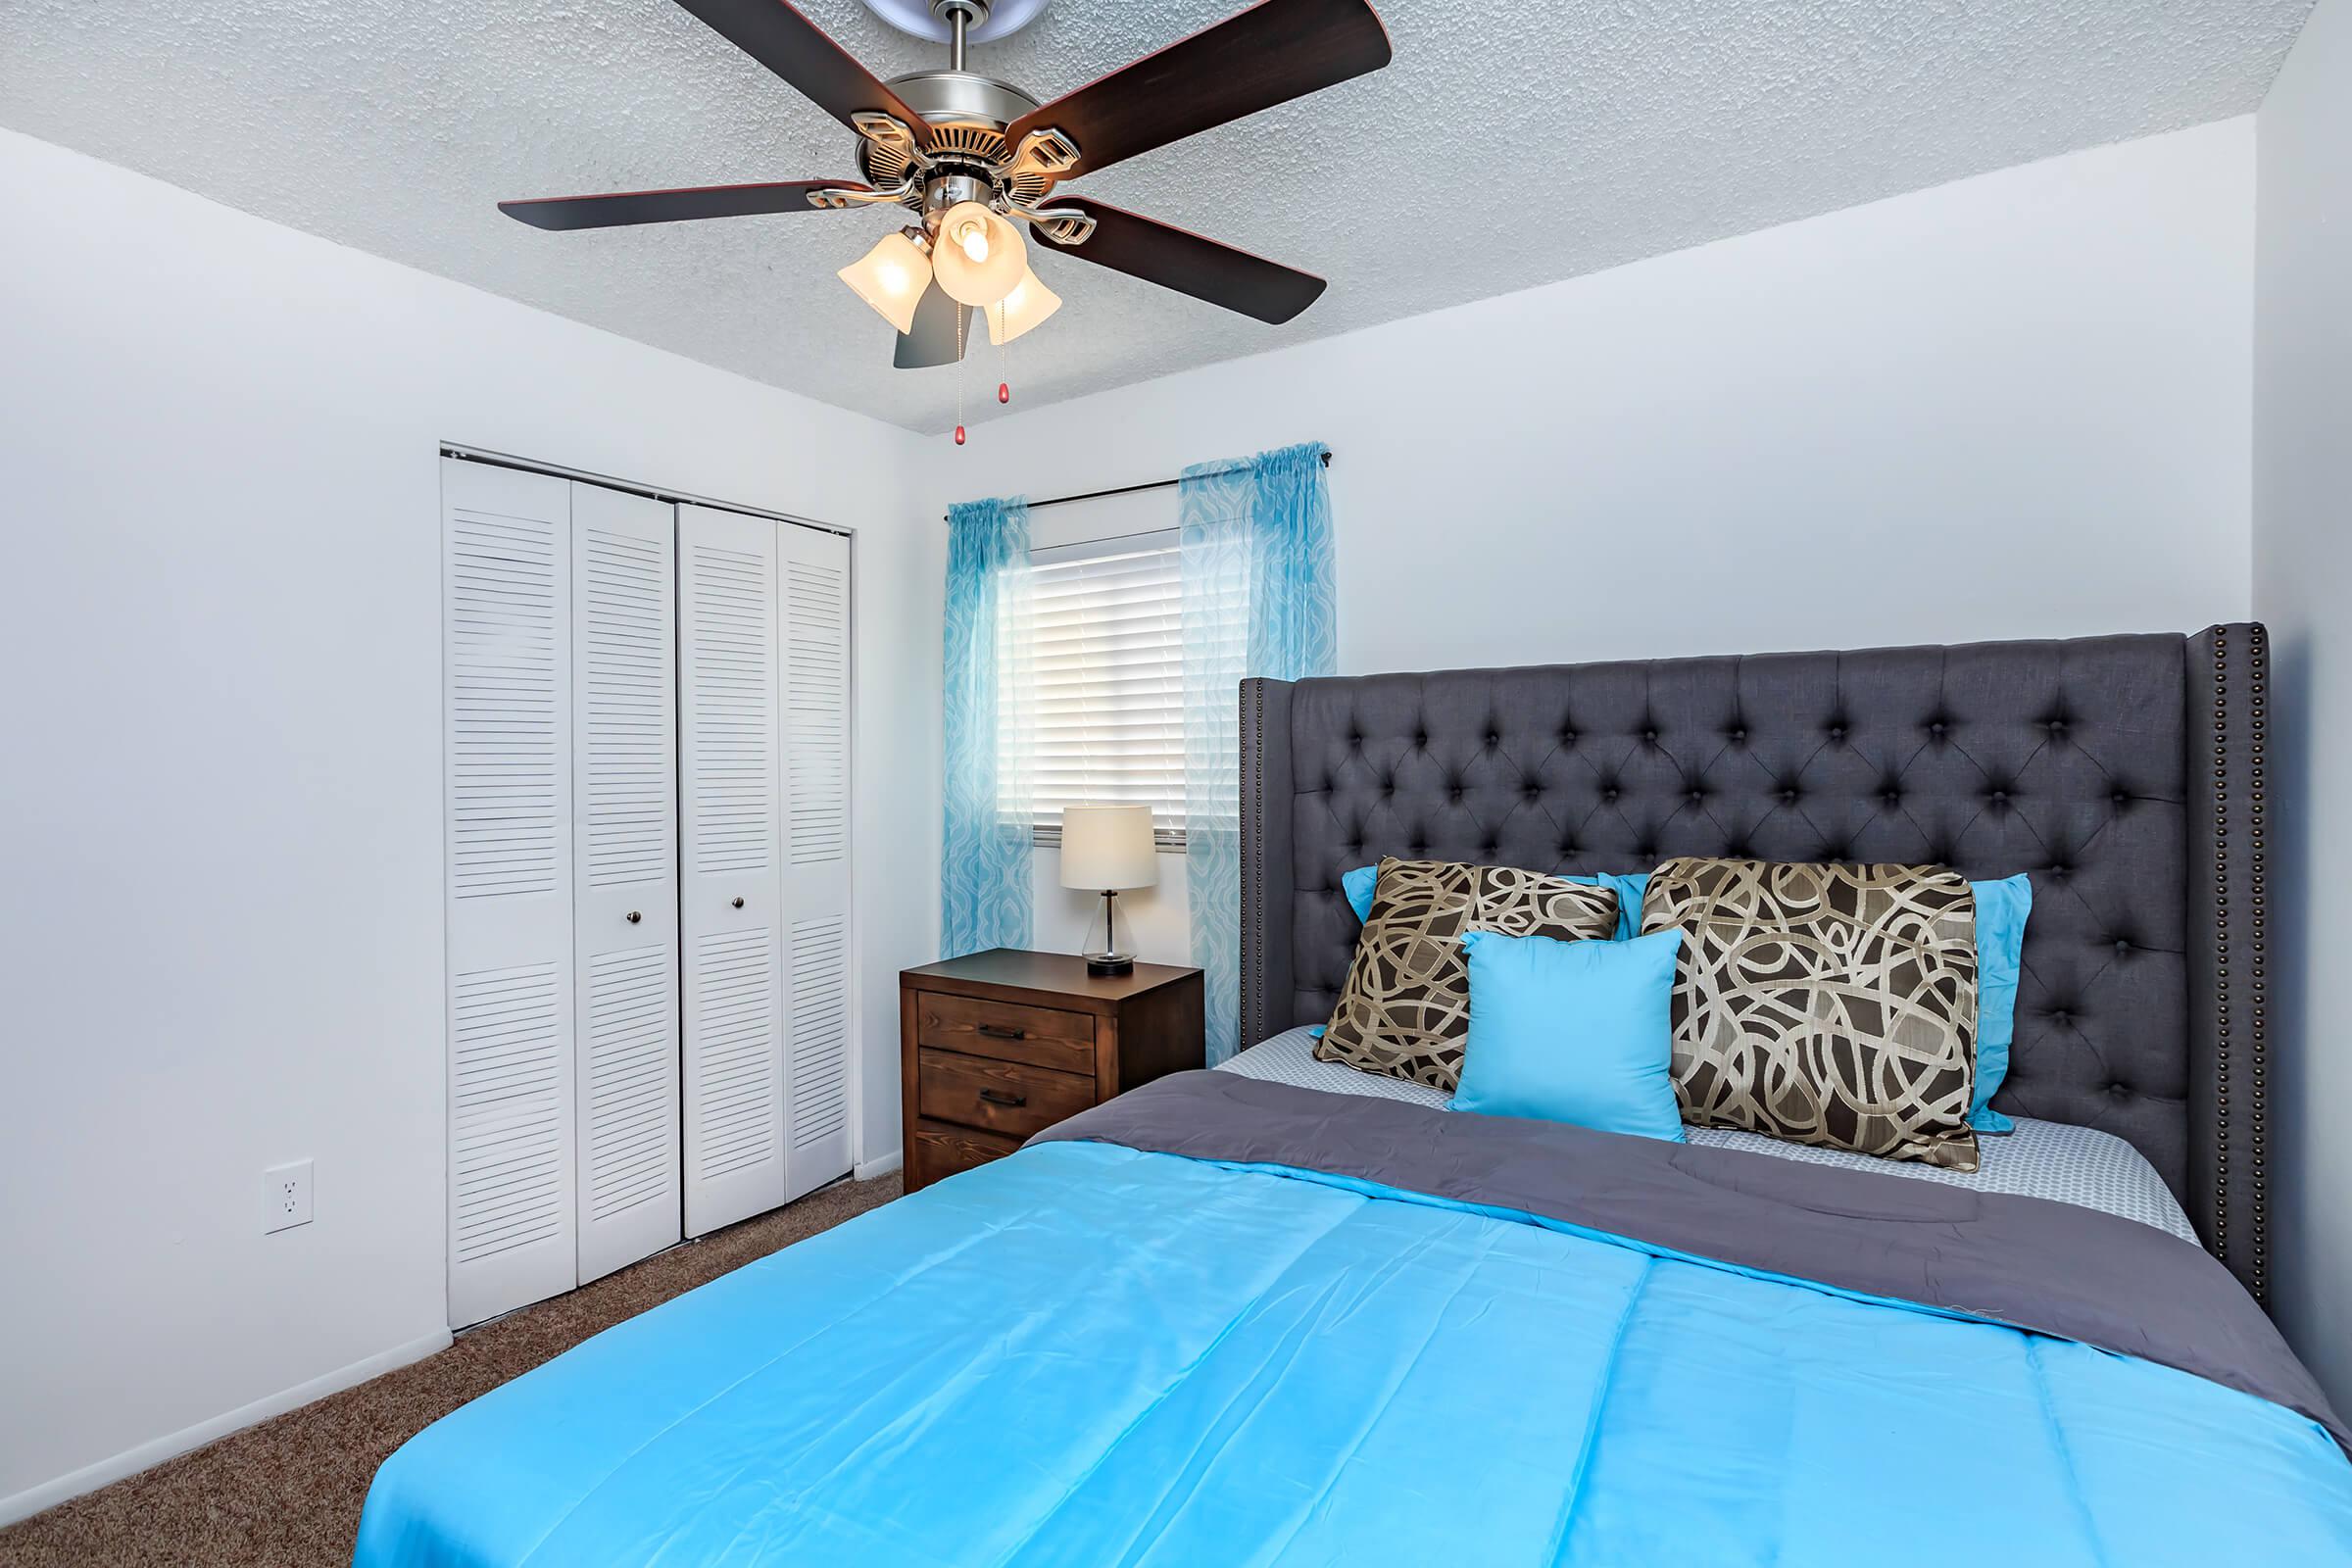 1 AND 2 BEDROOM APARTMENTS IN TAMPA, FLORIDA